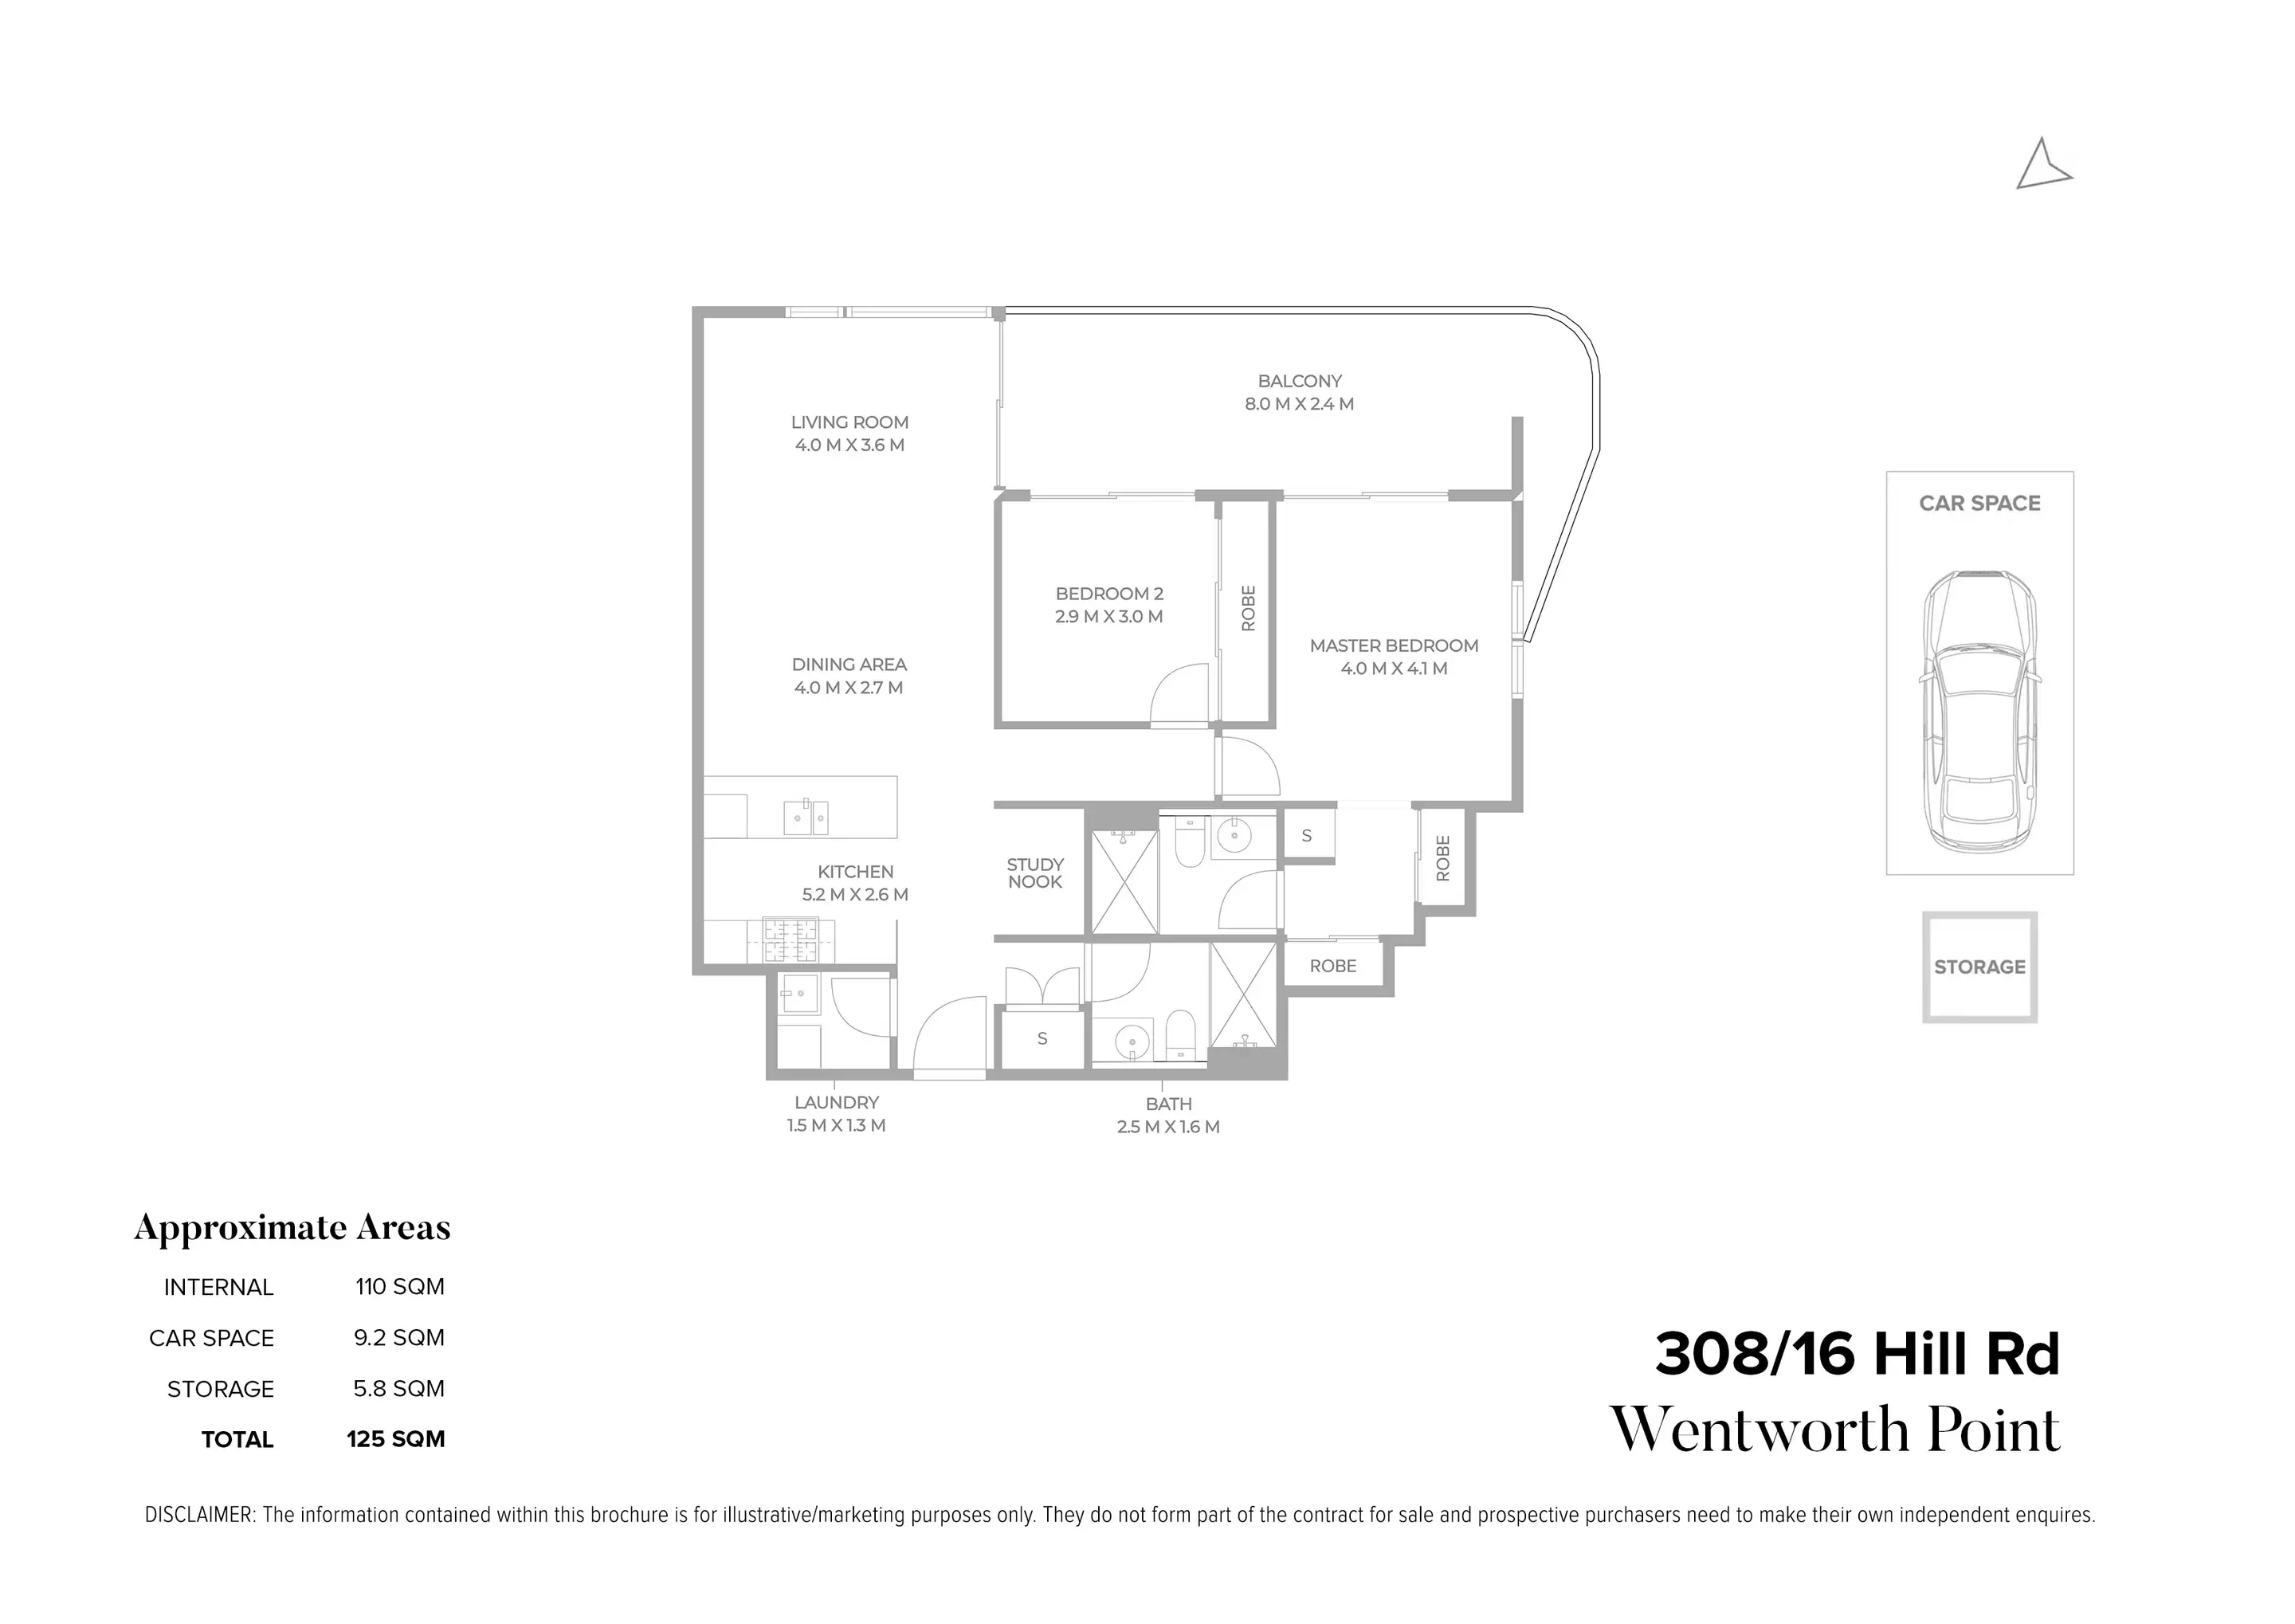 308/16 Hill Road, Wentworth Point Sold by Chidiac Realty - floorplan